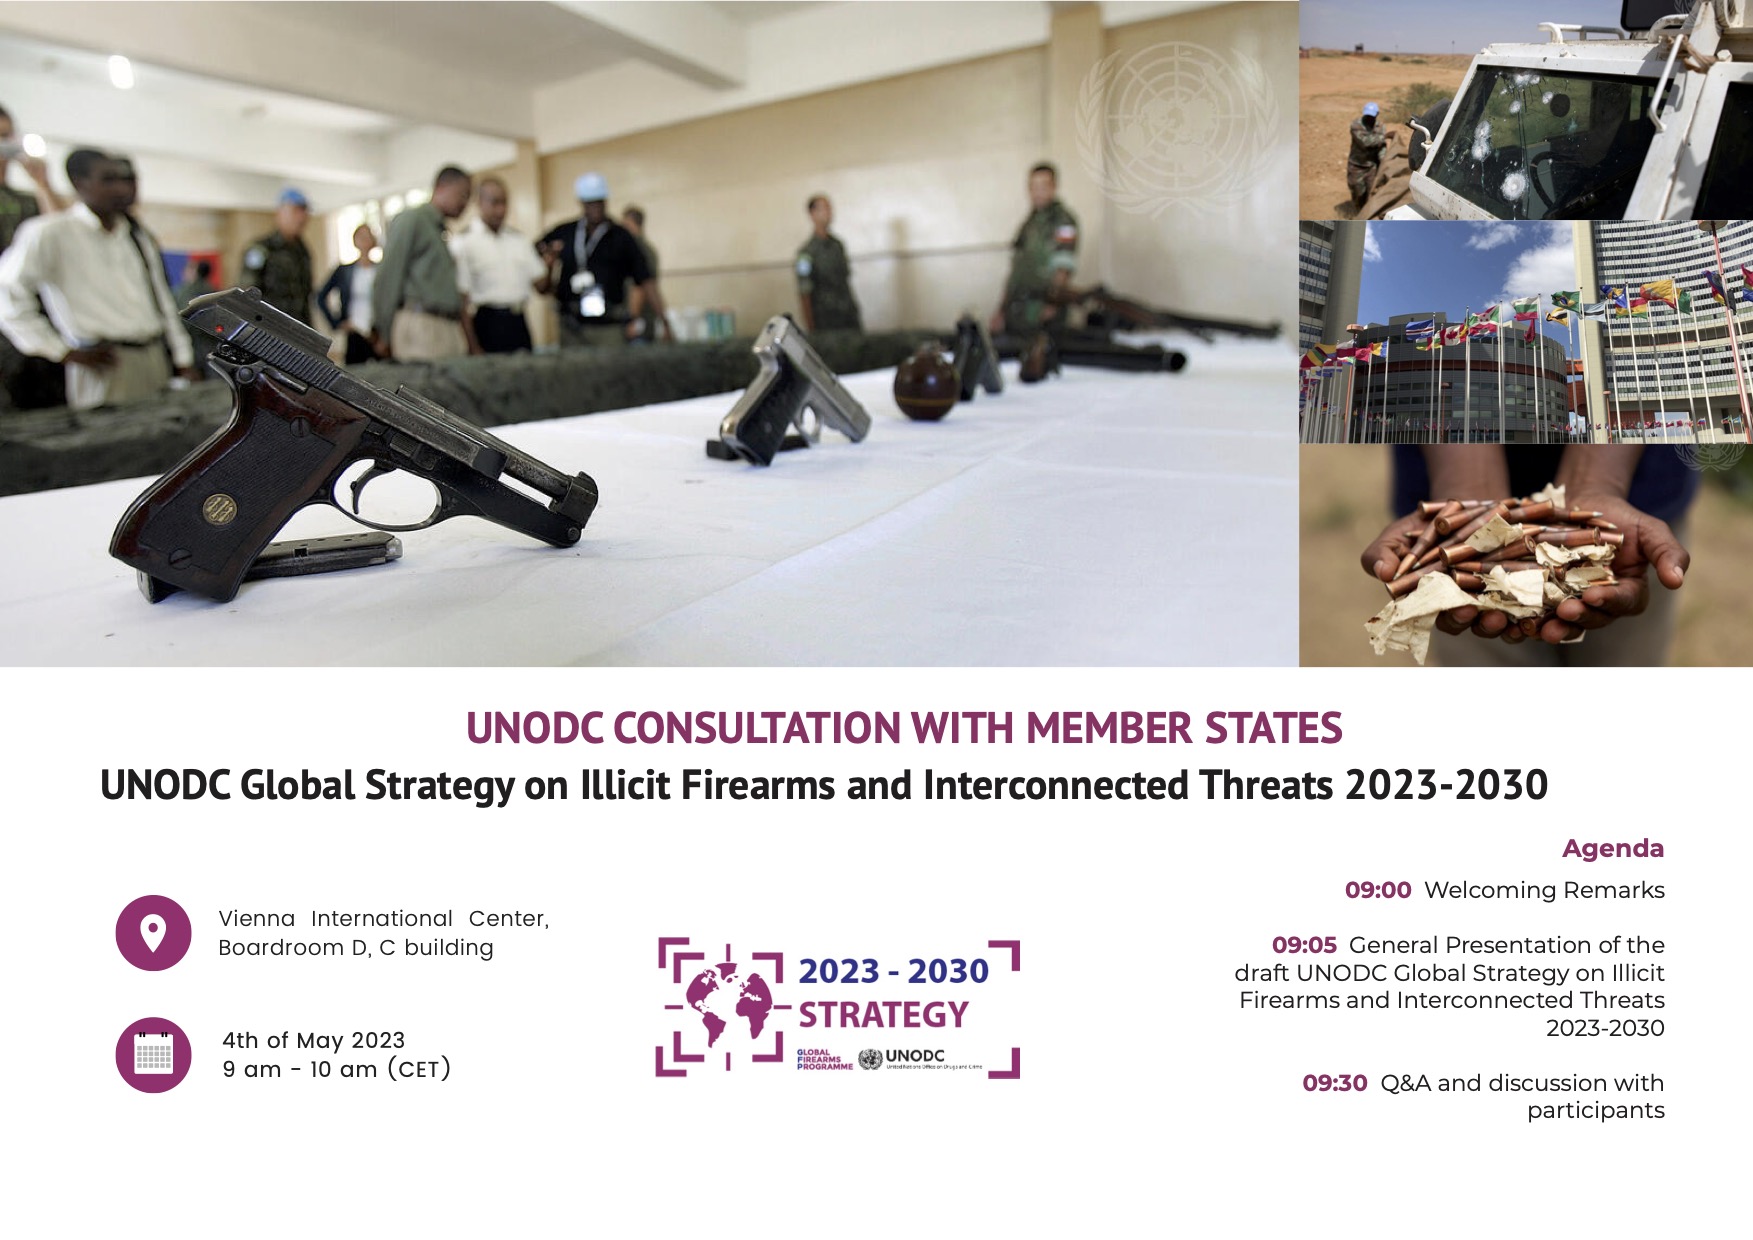 Flyer with images depicting firearms, a vehicle with glass broken due to shots of firearms, the Vienna International Centre and bullets held in the hands of a person. The following text appears on the flyer: UNODC Consultation with Member States - UNODC Global Strategy on Illicit Firearms and Interconnected Threats 2023-2030. 